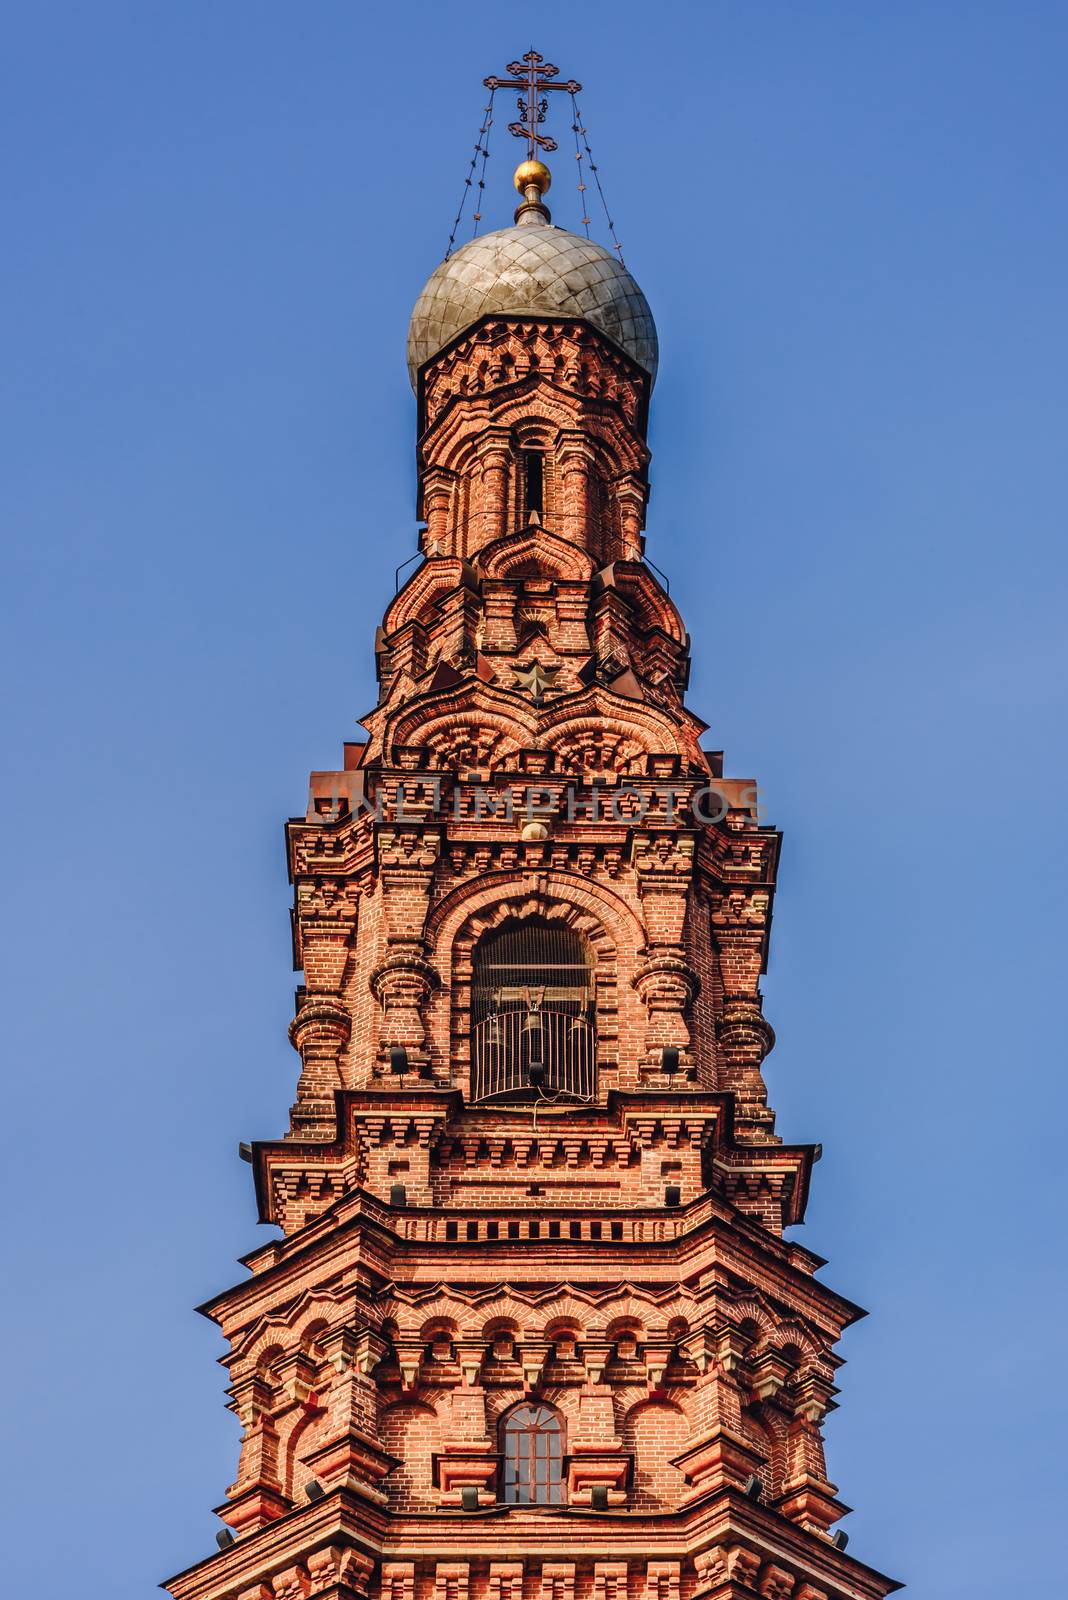 Bell Tower of Bogoyavlensky Cathedral - Epiphany Cathedral - in Kazan City.